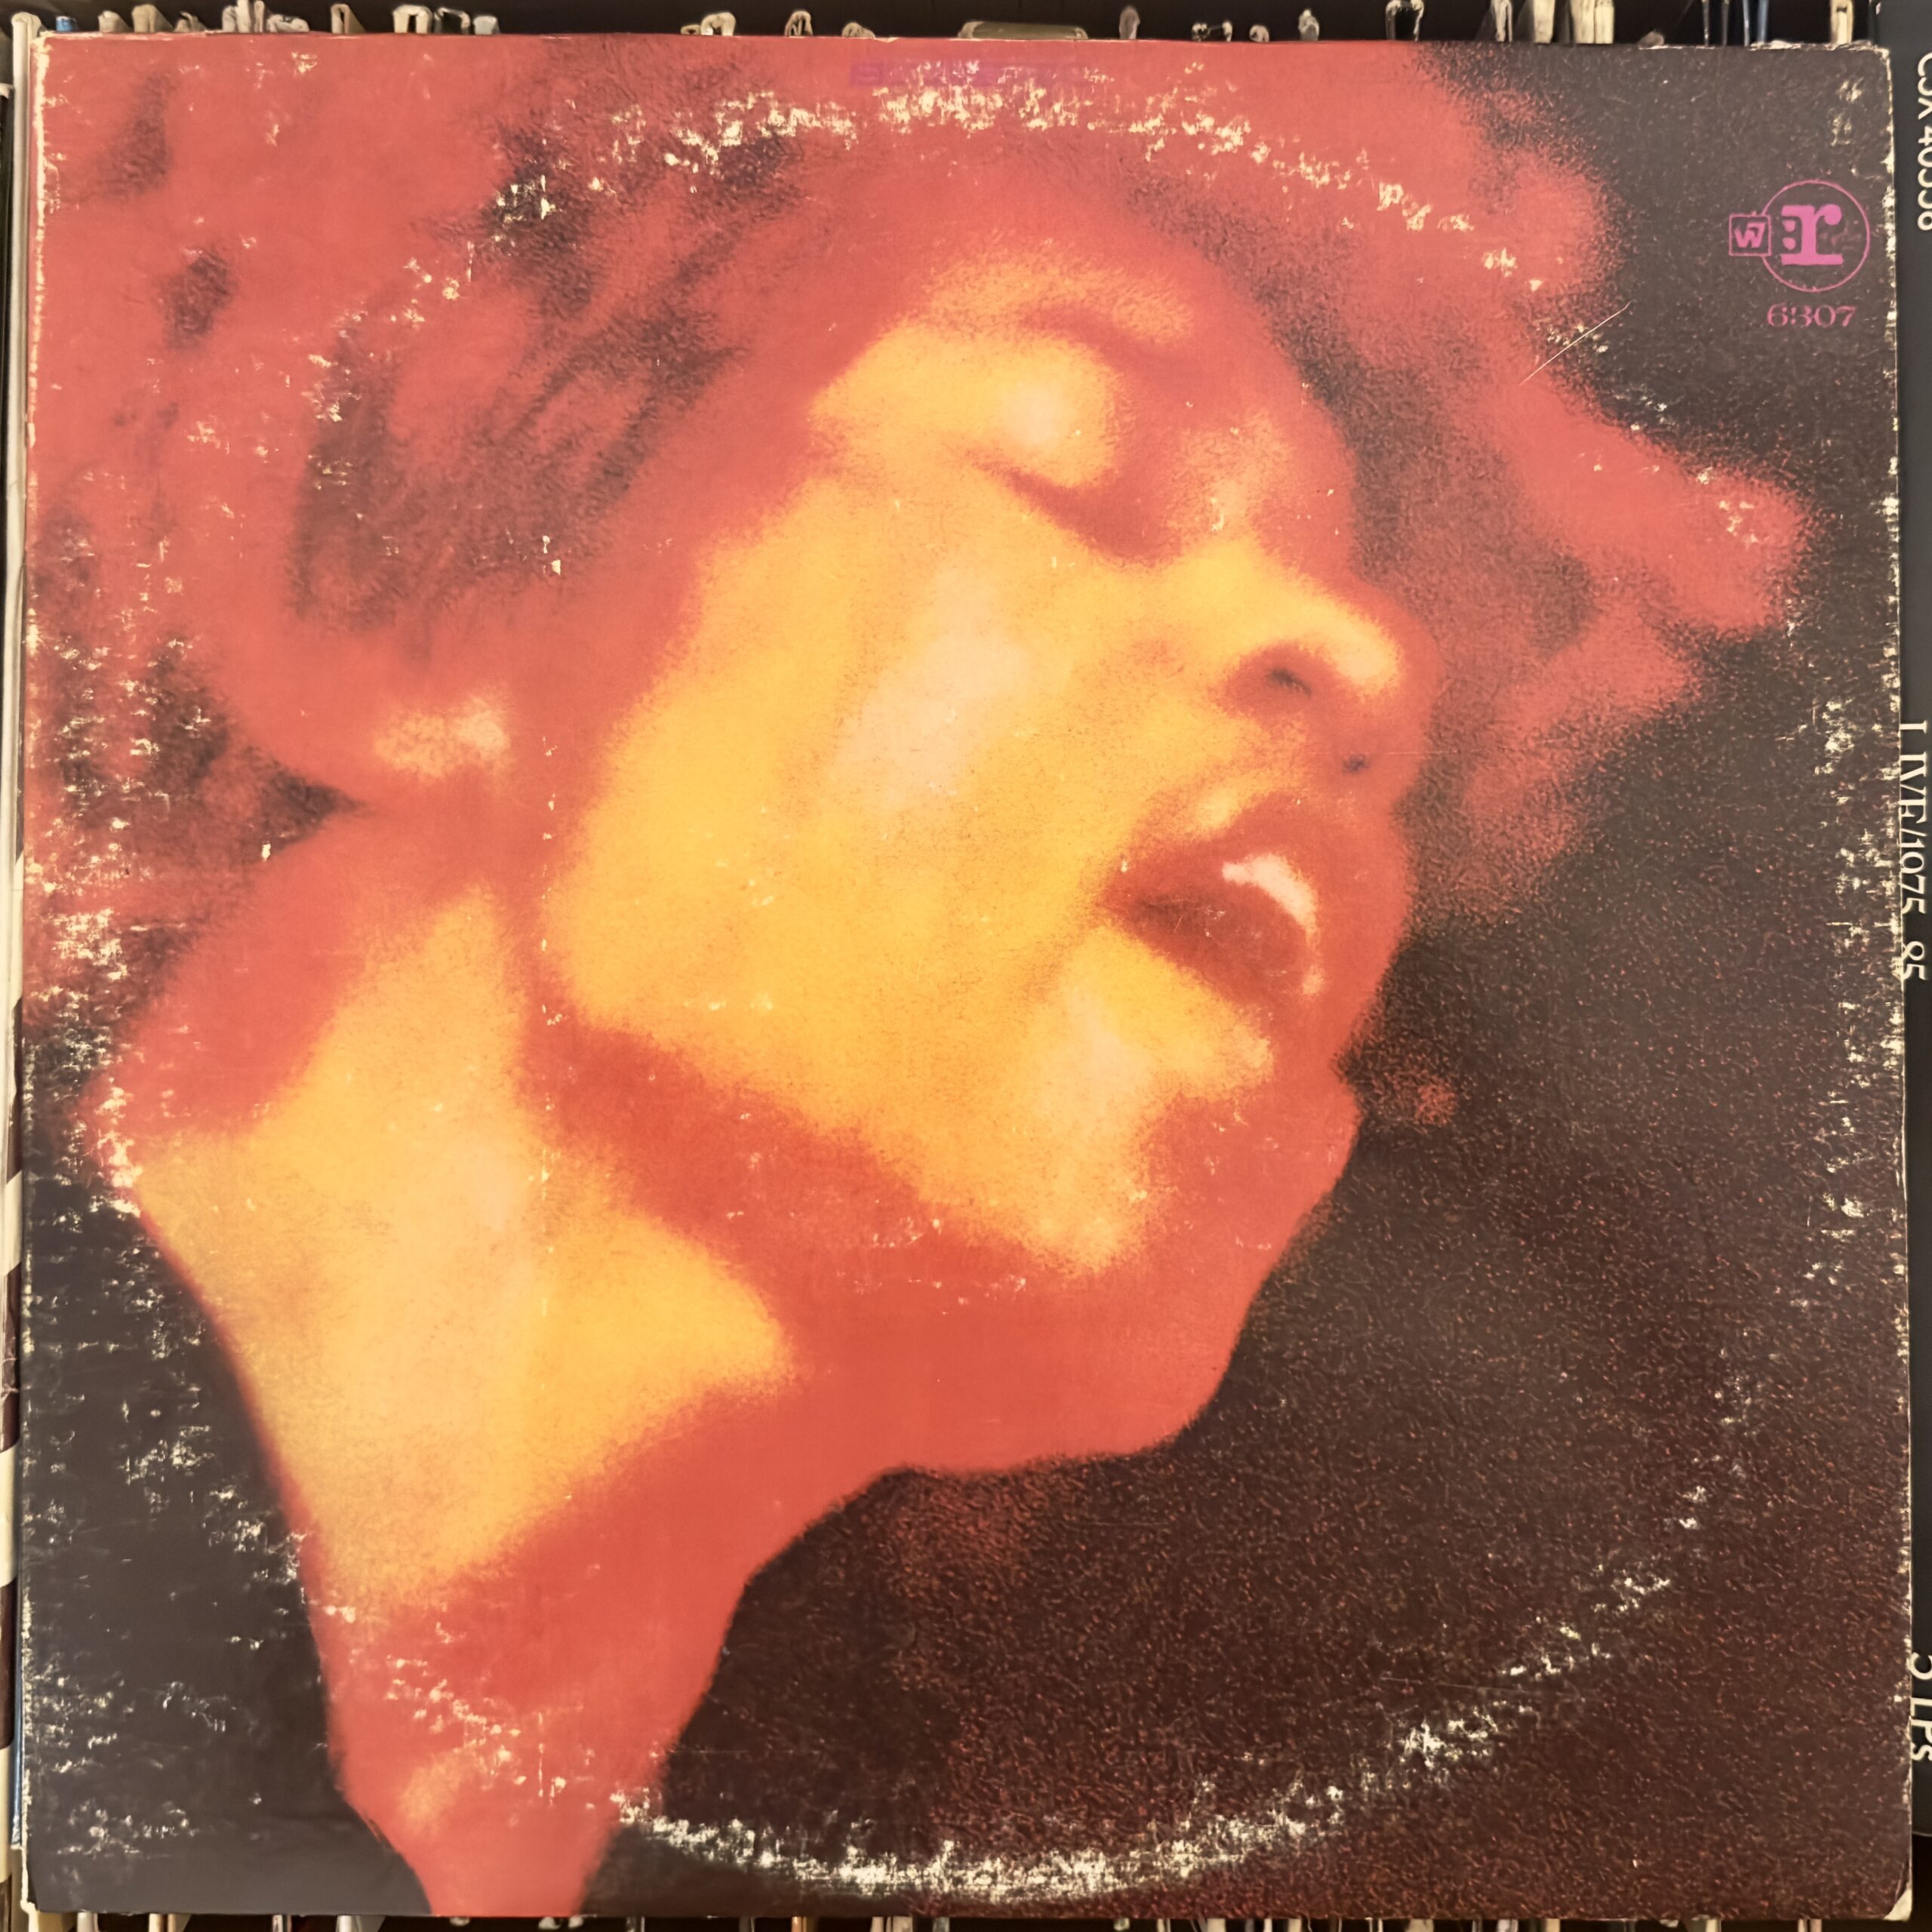 Electric Ladyland by the Jimi Hendrix Experience